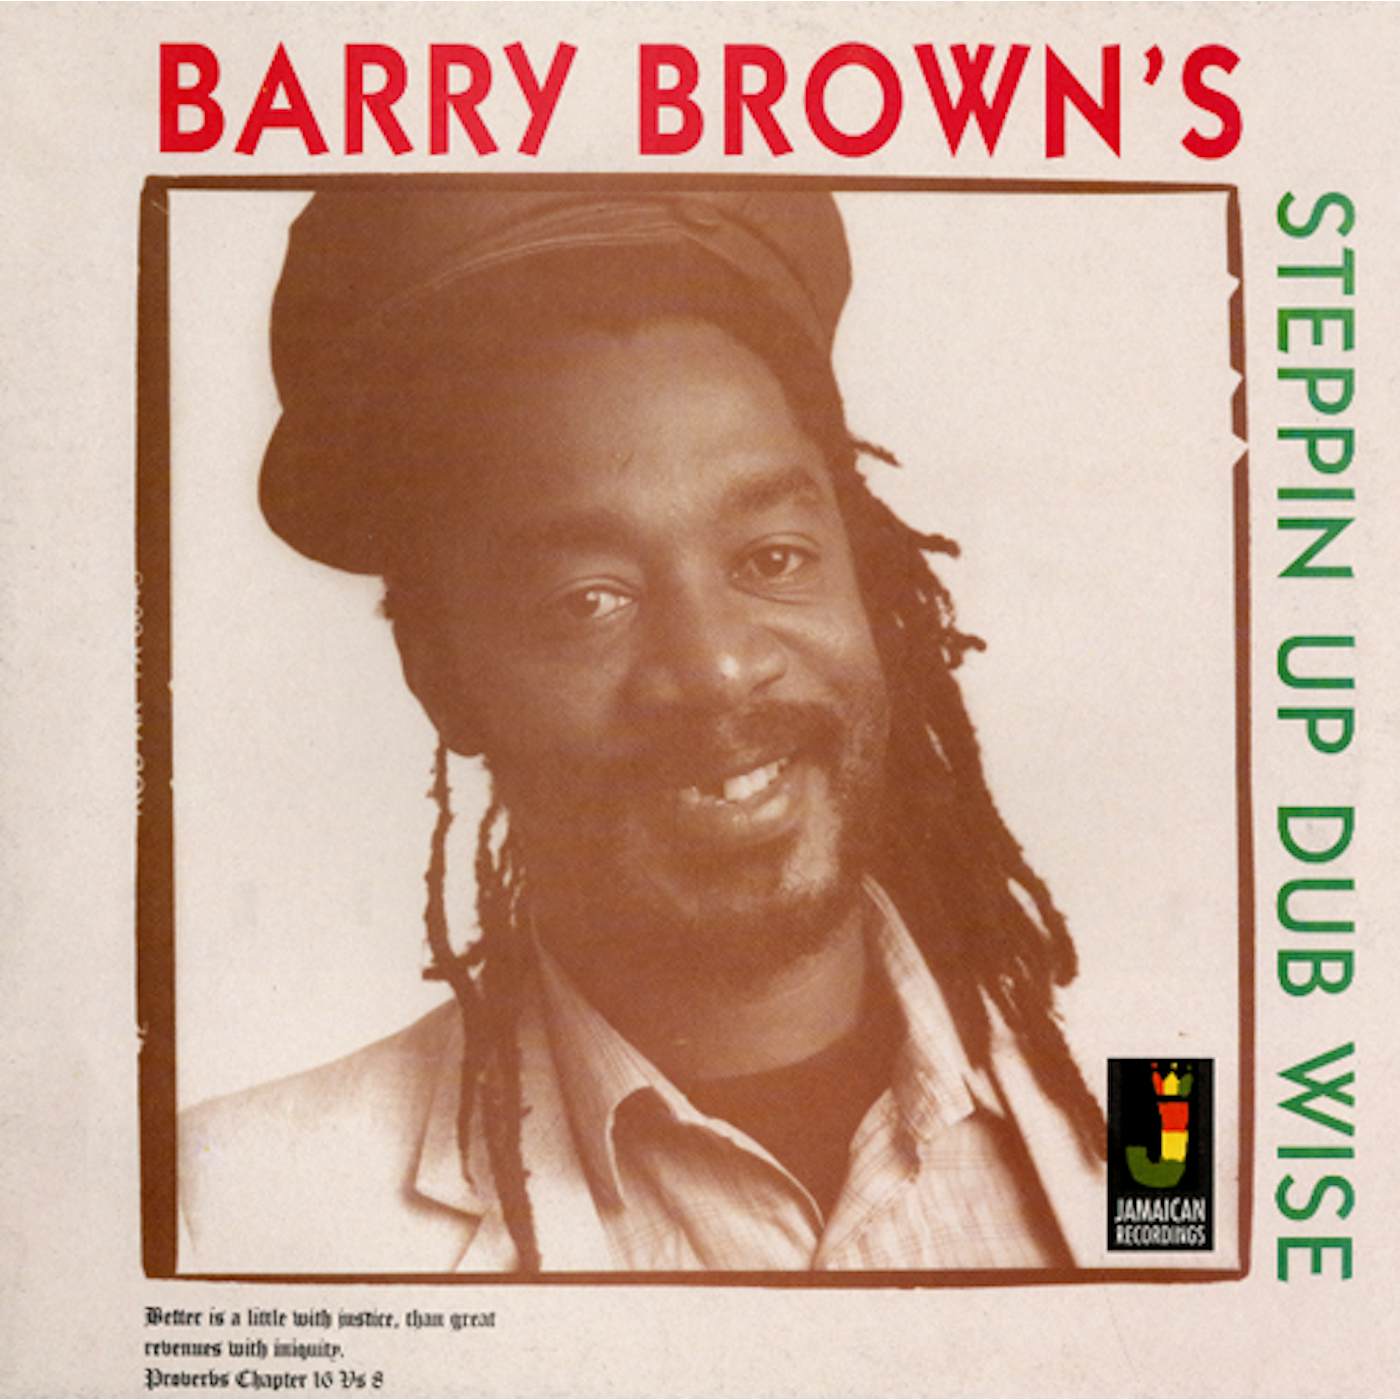 Barry Brown STEPPIN UP DUBWISE Vinyl Record